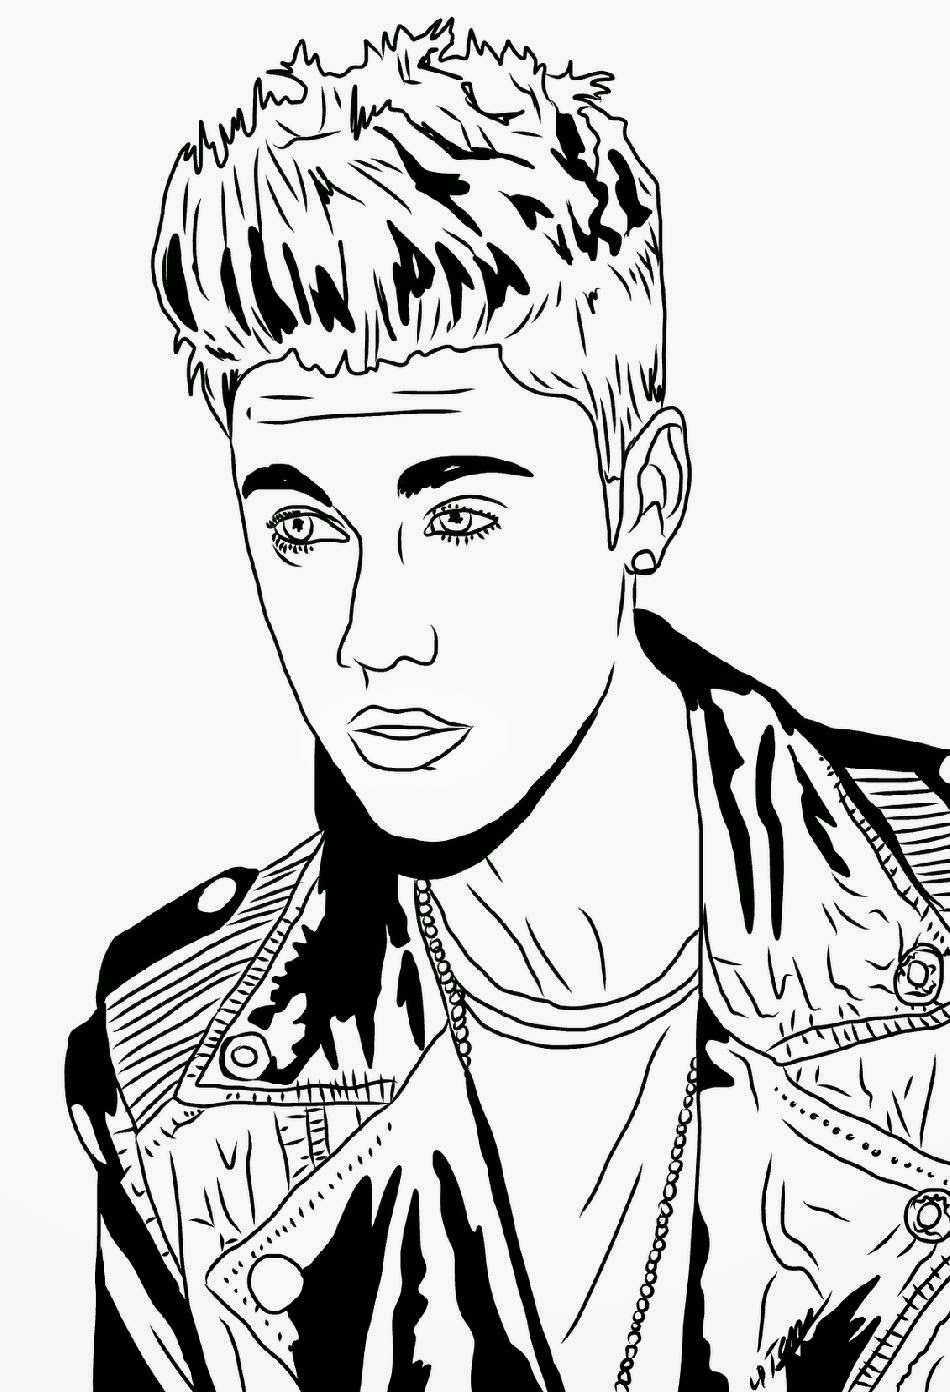 coloring pages of justin bieber - Justin Bieber Coloring Pages Coloring Pages Printables